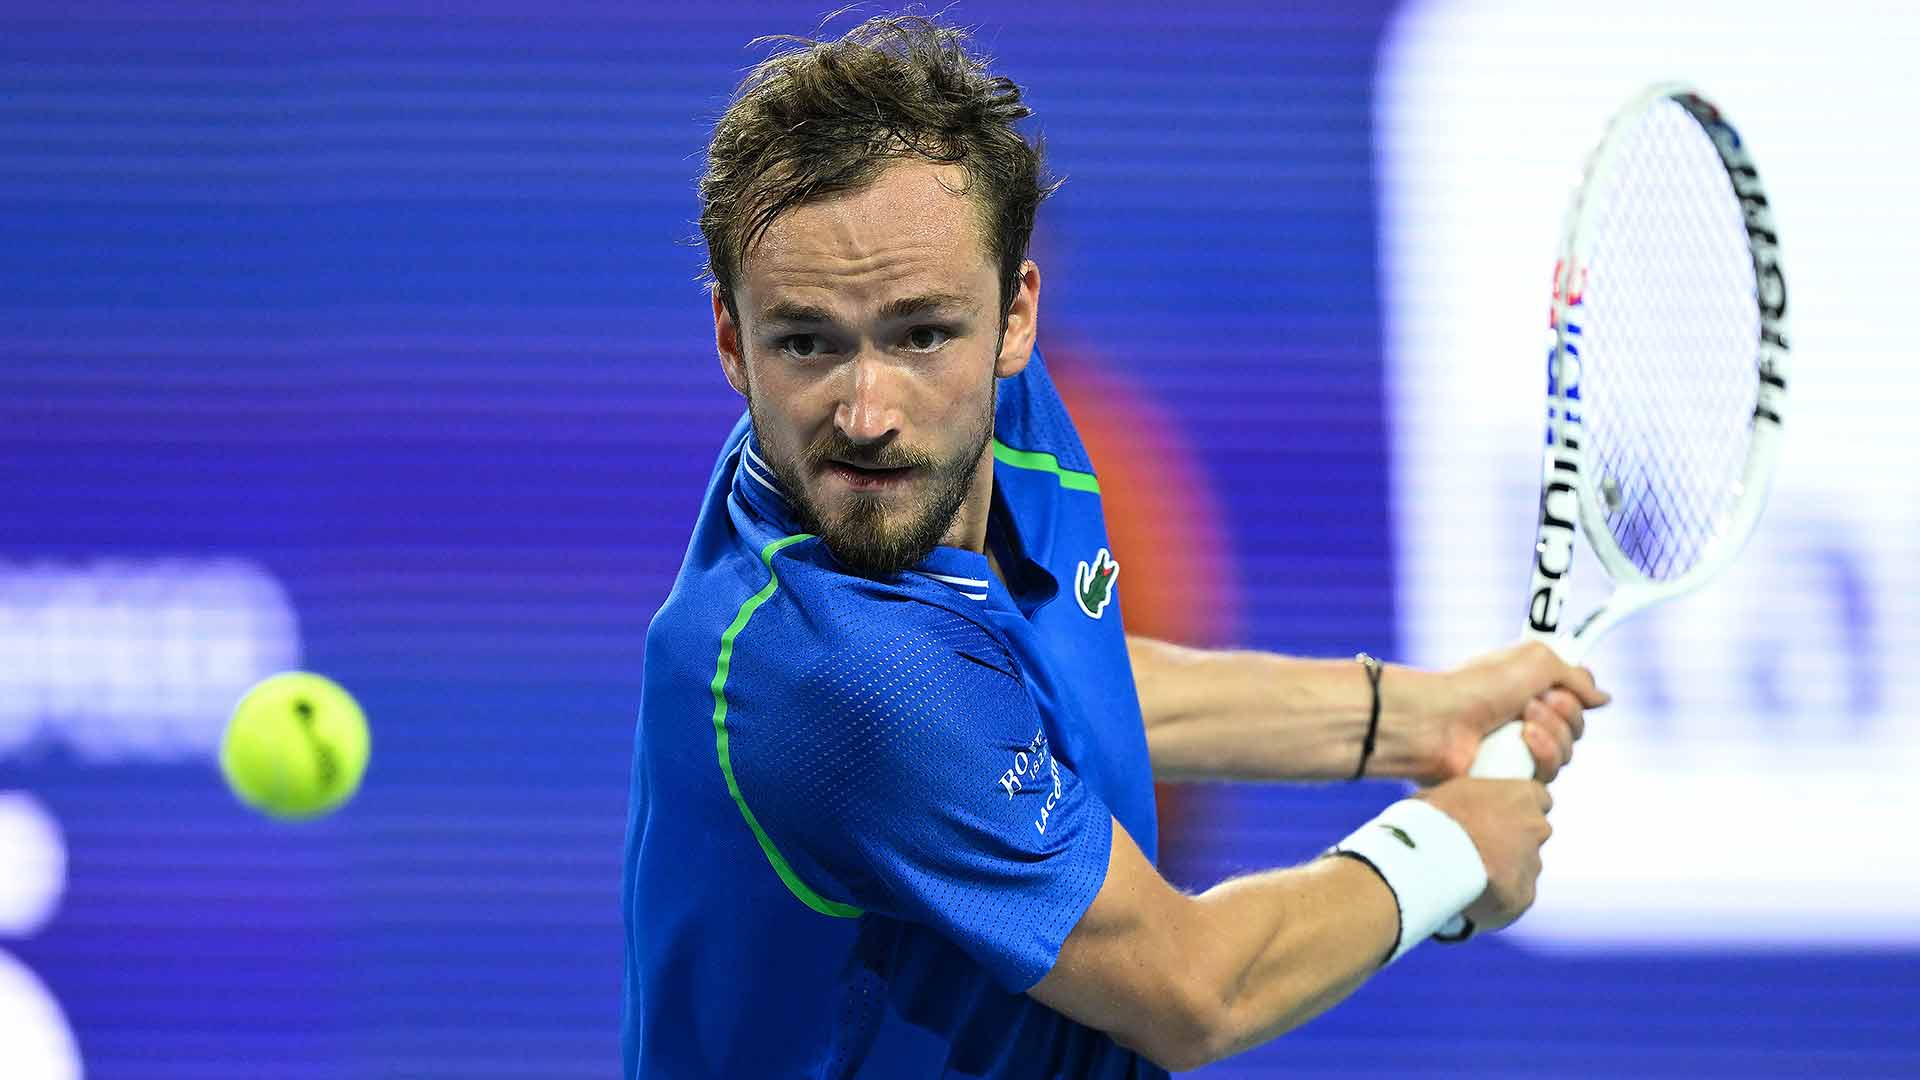 Daniil Medvedev has reached the final of all ATP Masters 1000 finals, with the exception of Miami.